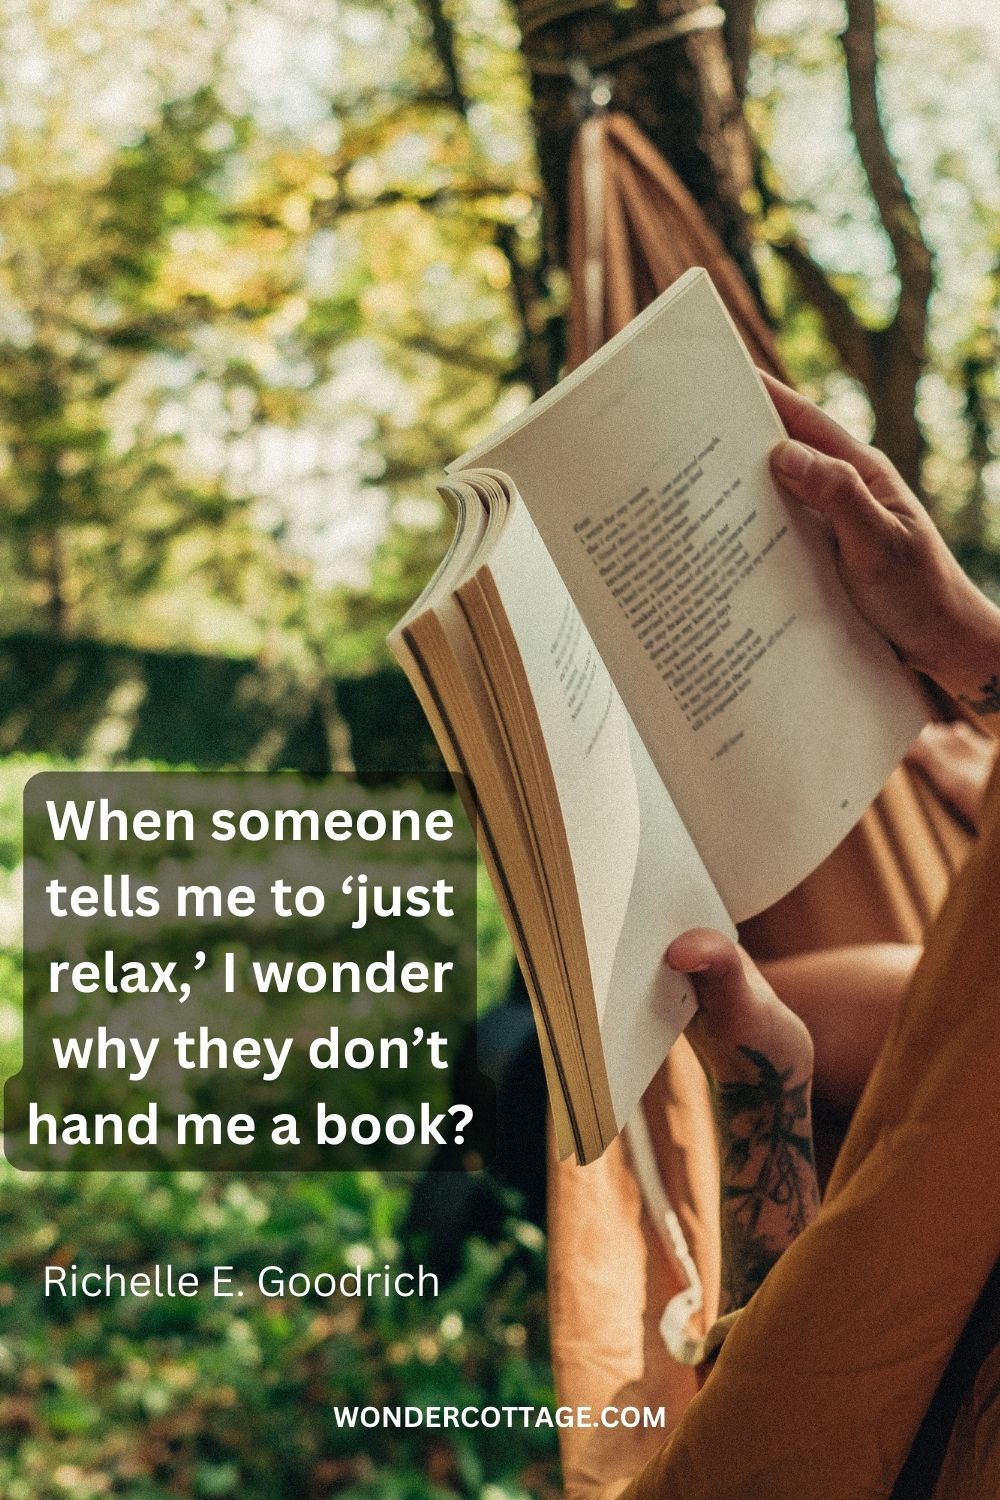 When someone tells me to ‘just relax,’ I wonder why they don’t hand me a book? Richelle E. Goodrich